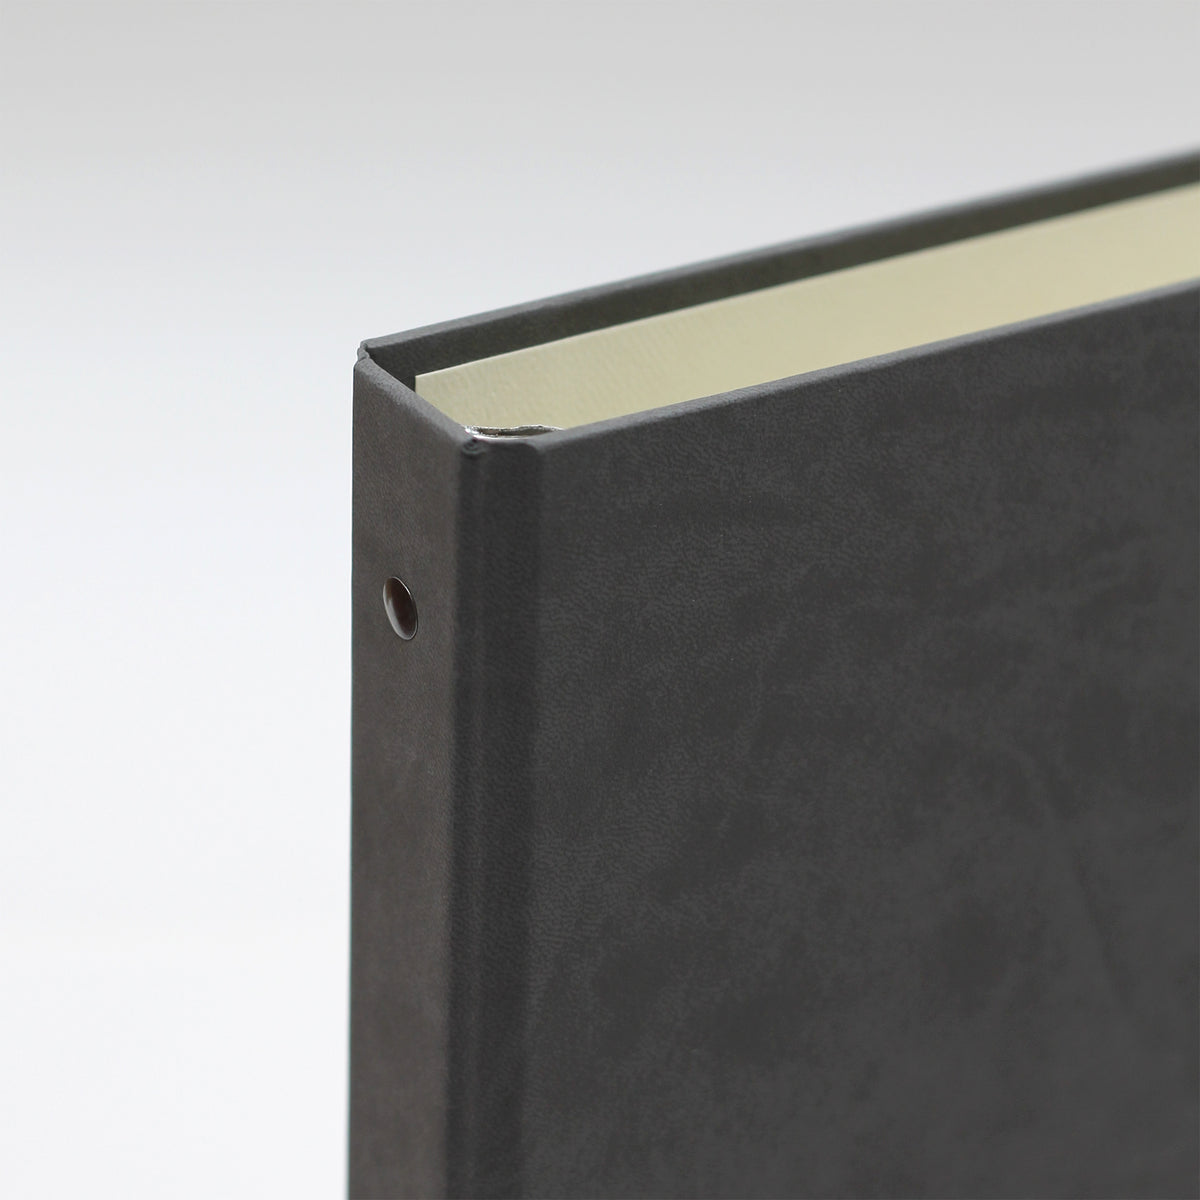 Medium Photo Binder For 4x6 Photos | Cover: Slate Vegan Leather | Available Personalized